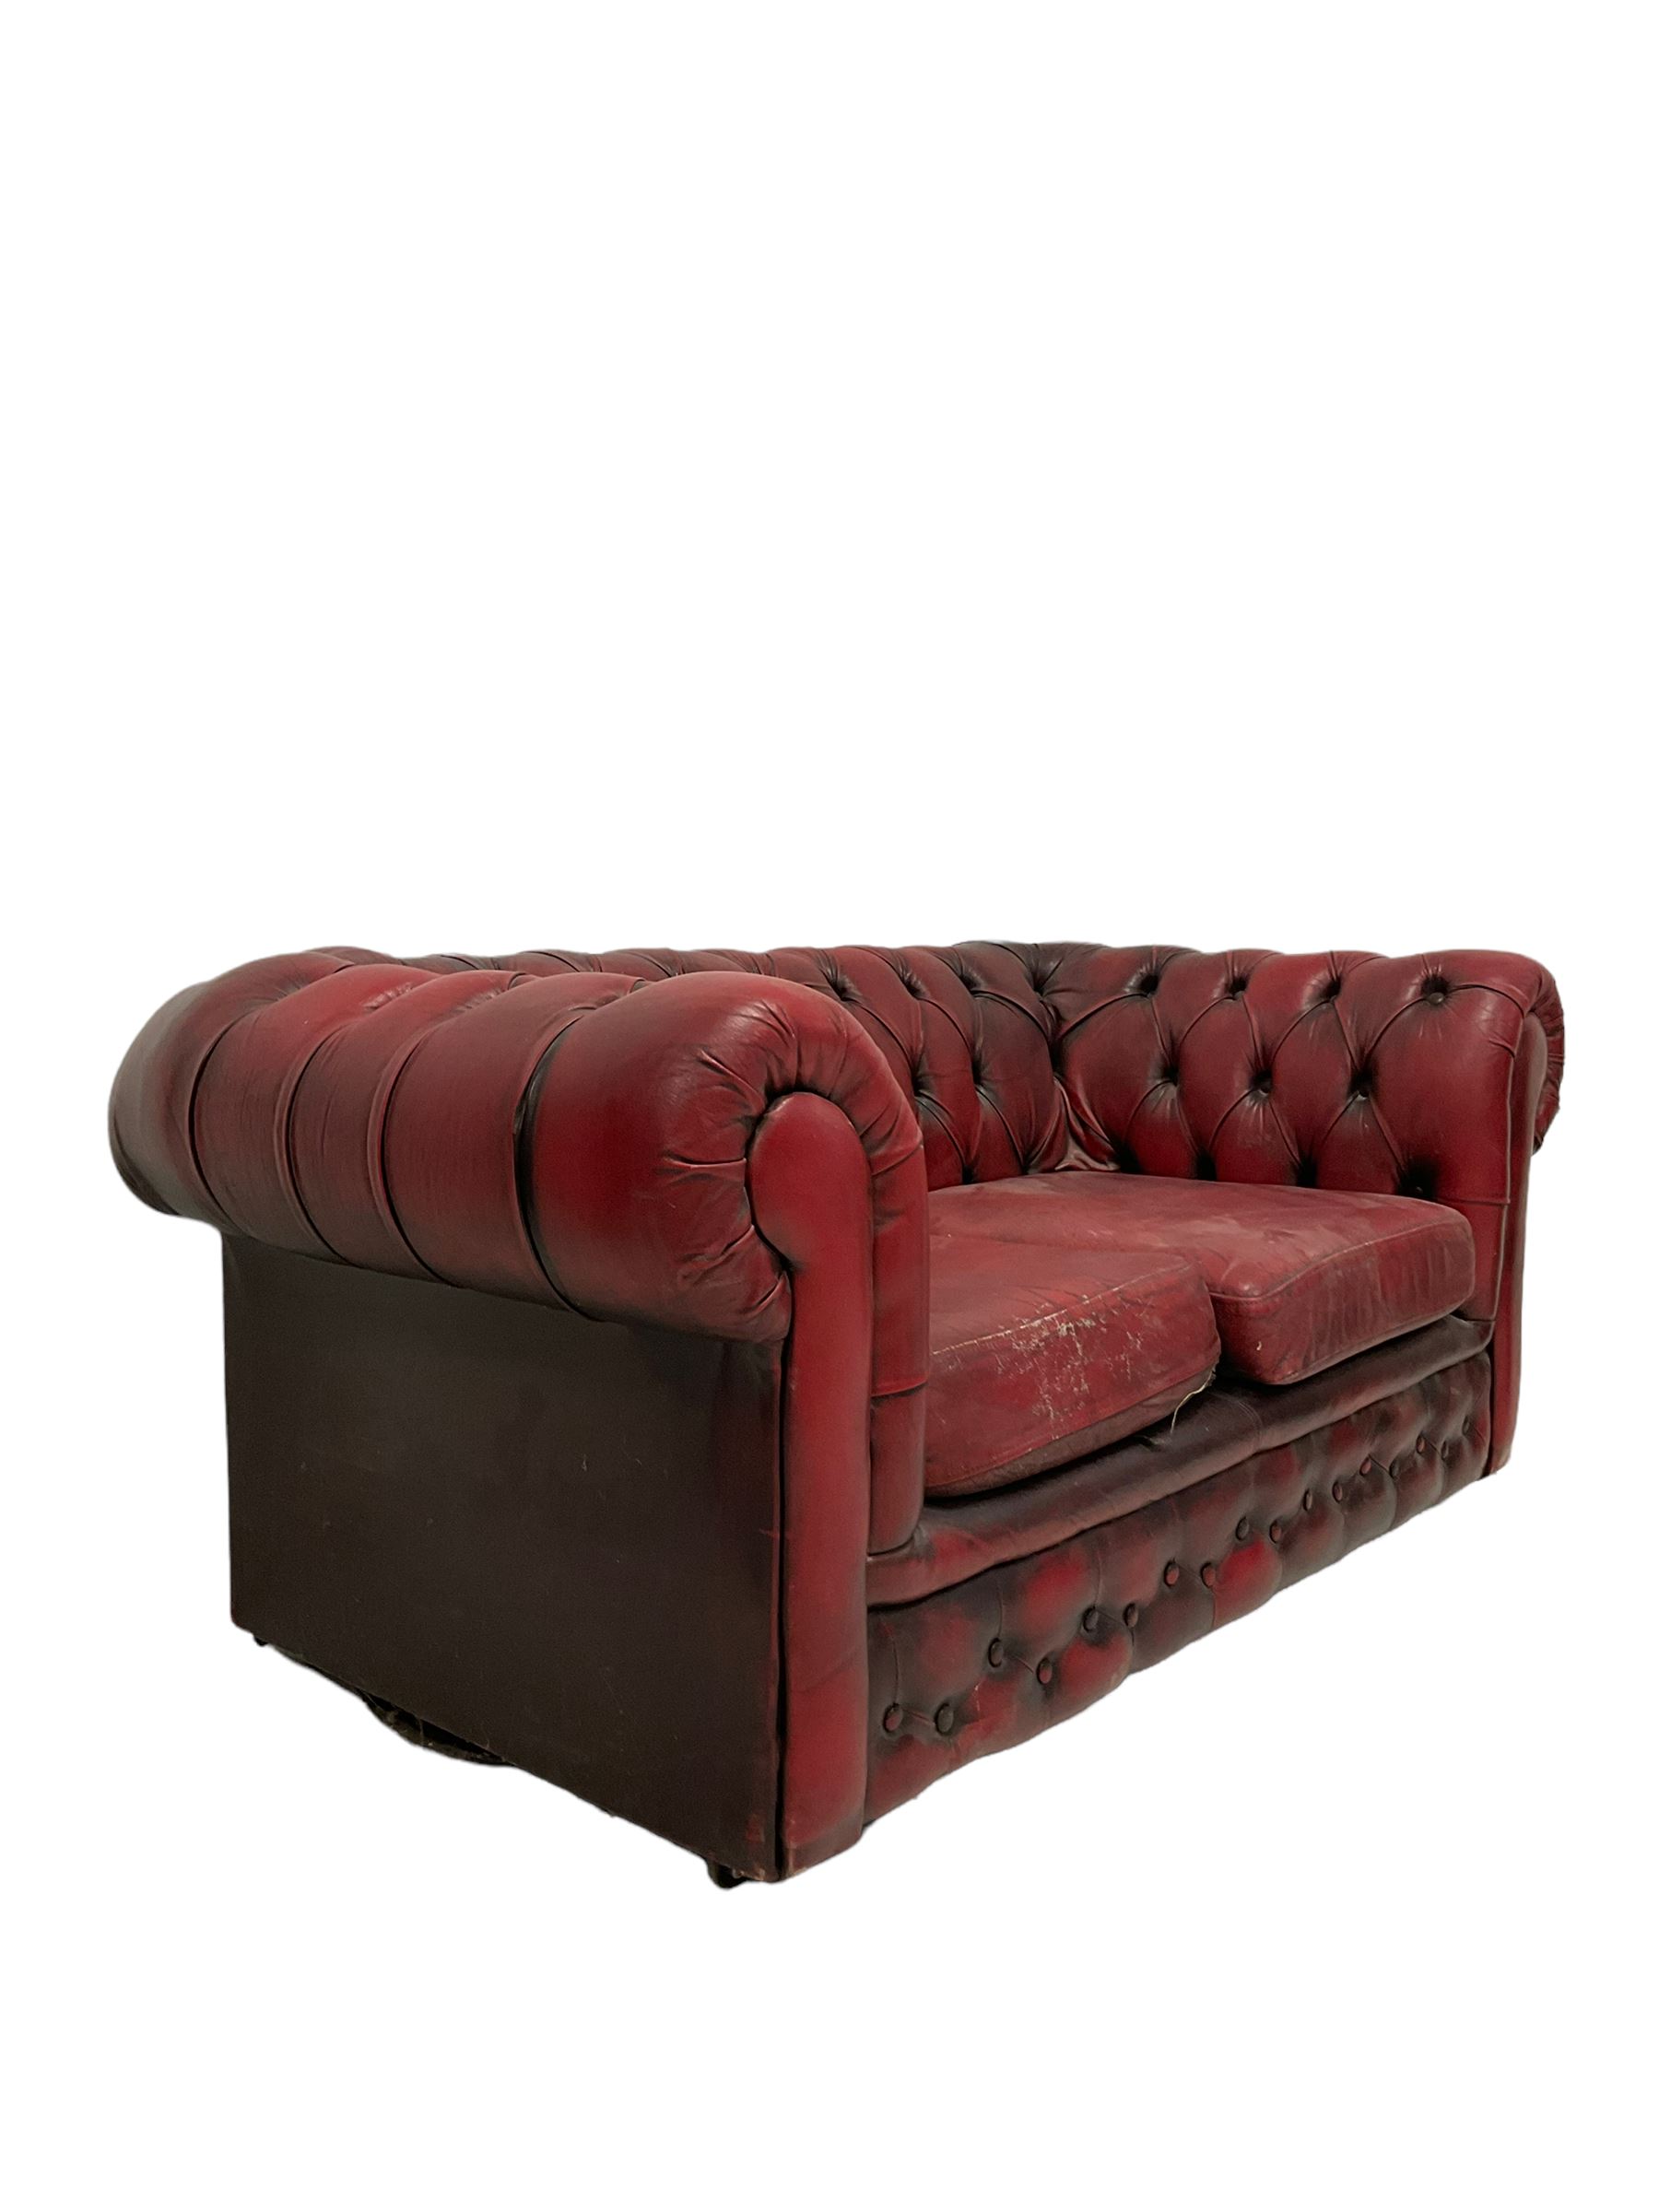 Two seat Chesterfield sofa upholstered in buttoned red leather - Image 2 of 4